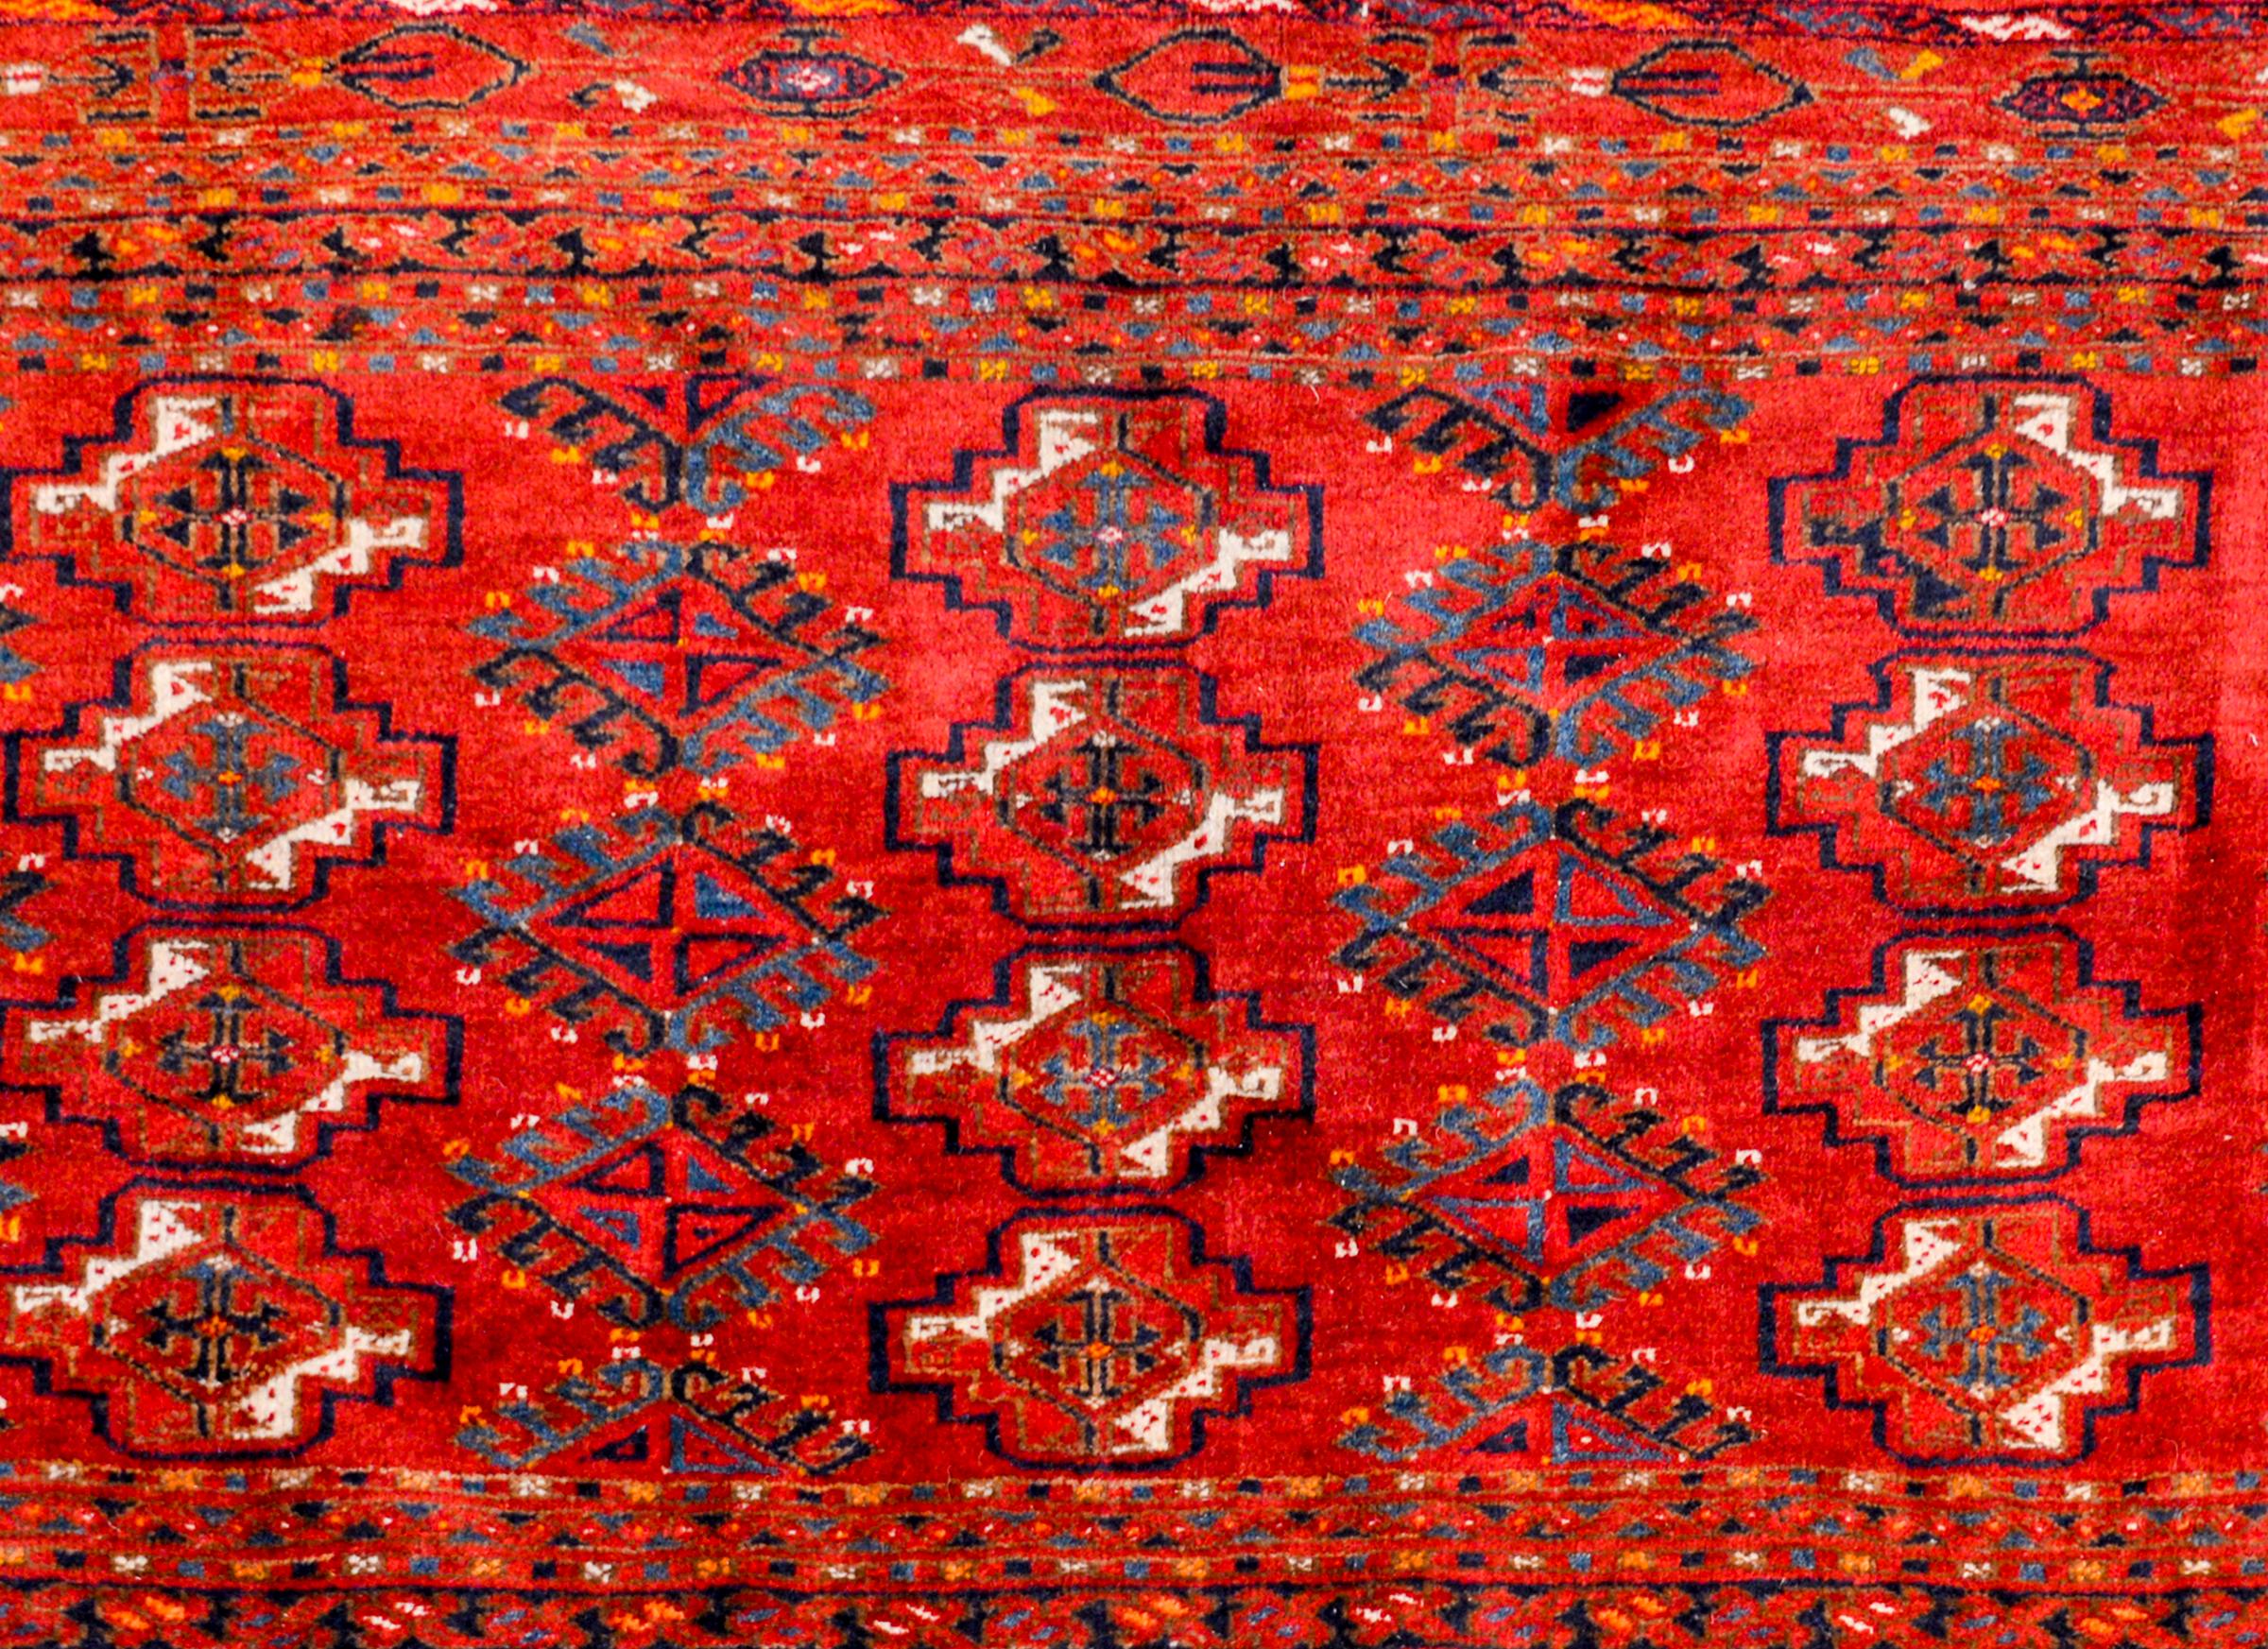 A wonderful early 20th century Persian Turkoman bag face rug with a beautiful all-over pattern of stepped diamonds woven in white, orange, and black wool, on a bold crimson background. A sweet border with trees and other stylized flowers surrounds